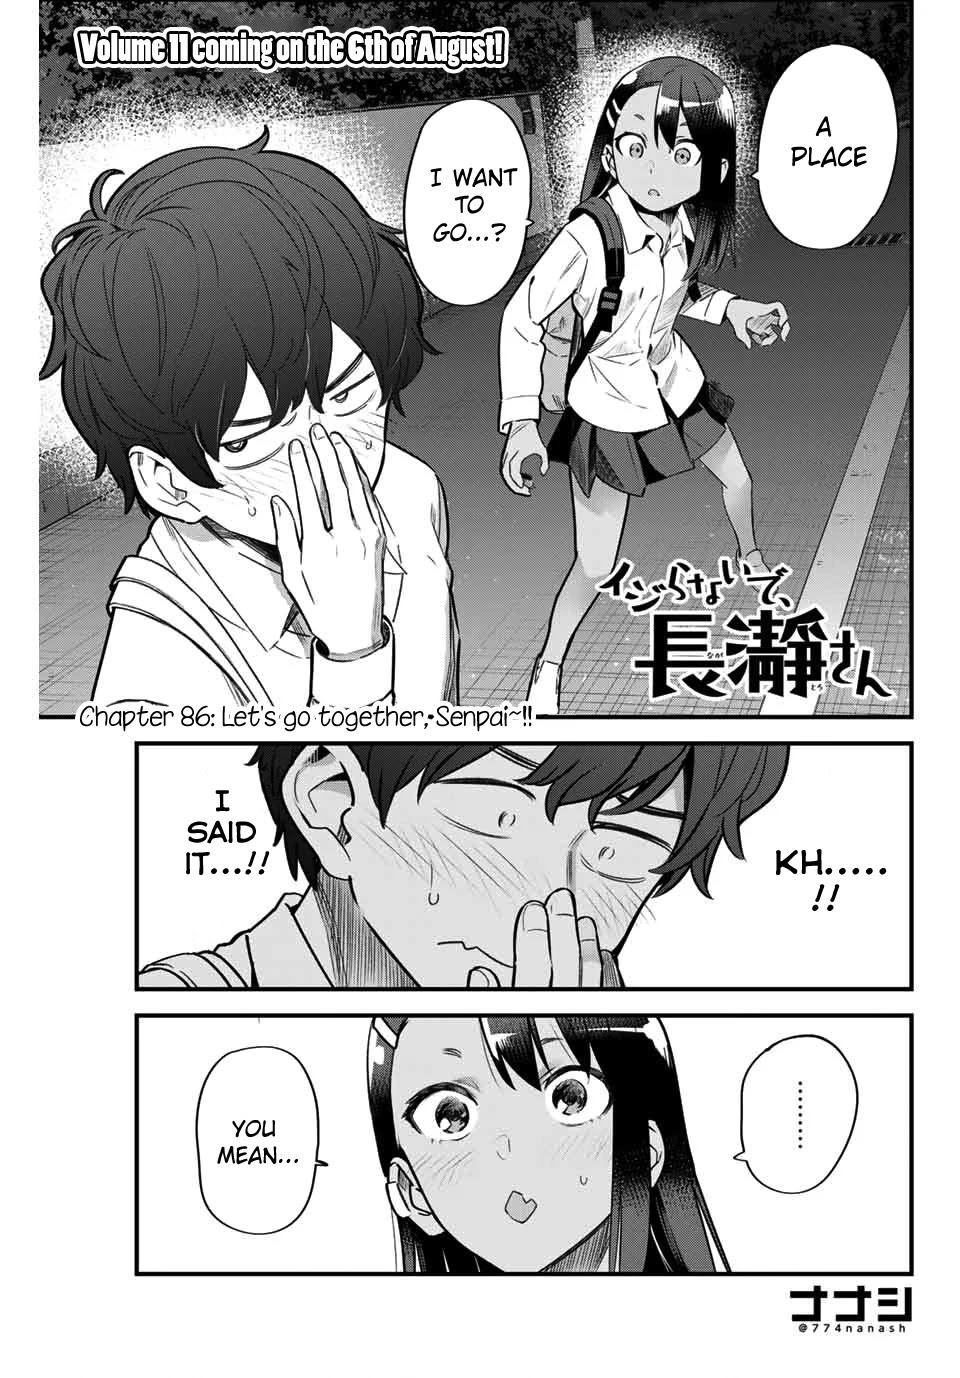 Don't Toy With Me, Miss Nagatoro, Chapter 121 - Don't Toy With Me, Miss  Nagatoro Manga Online